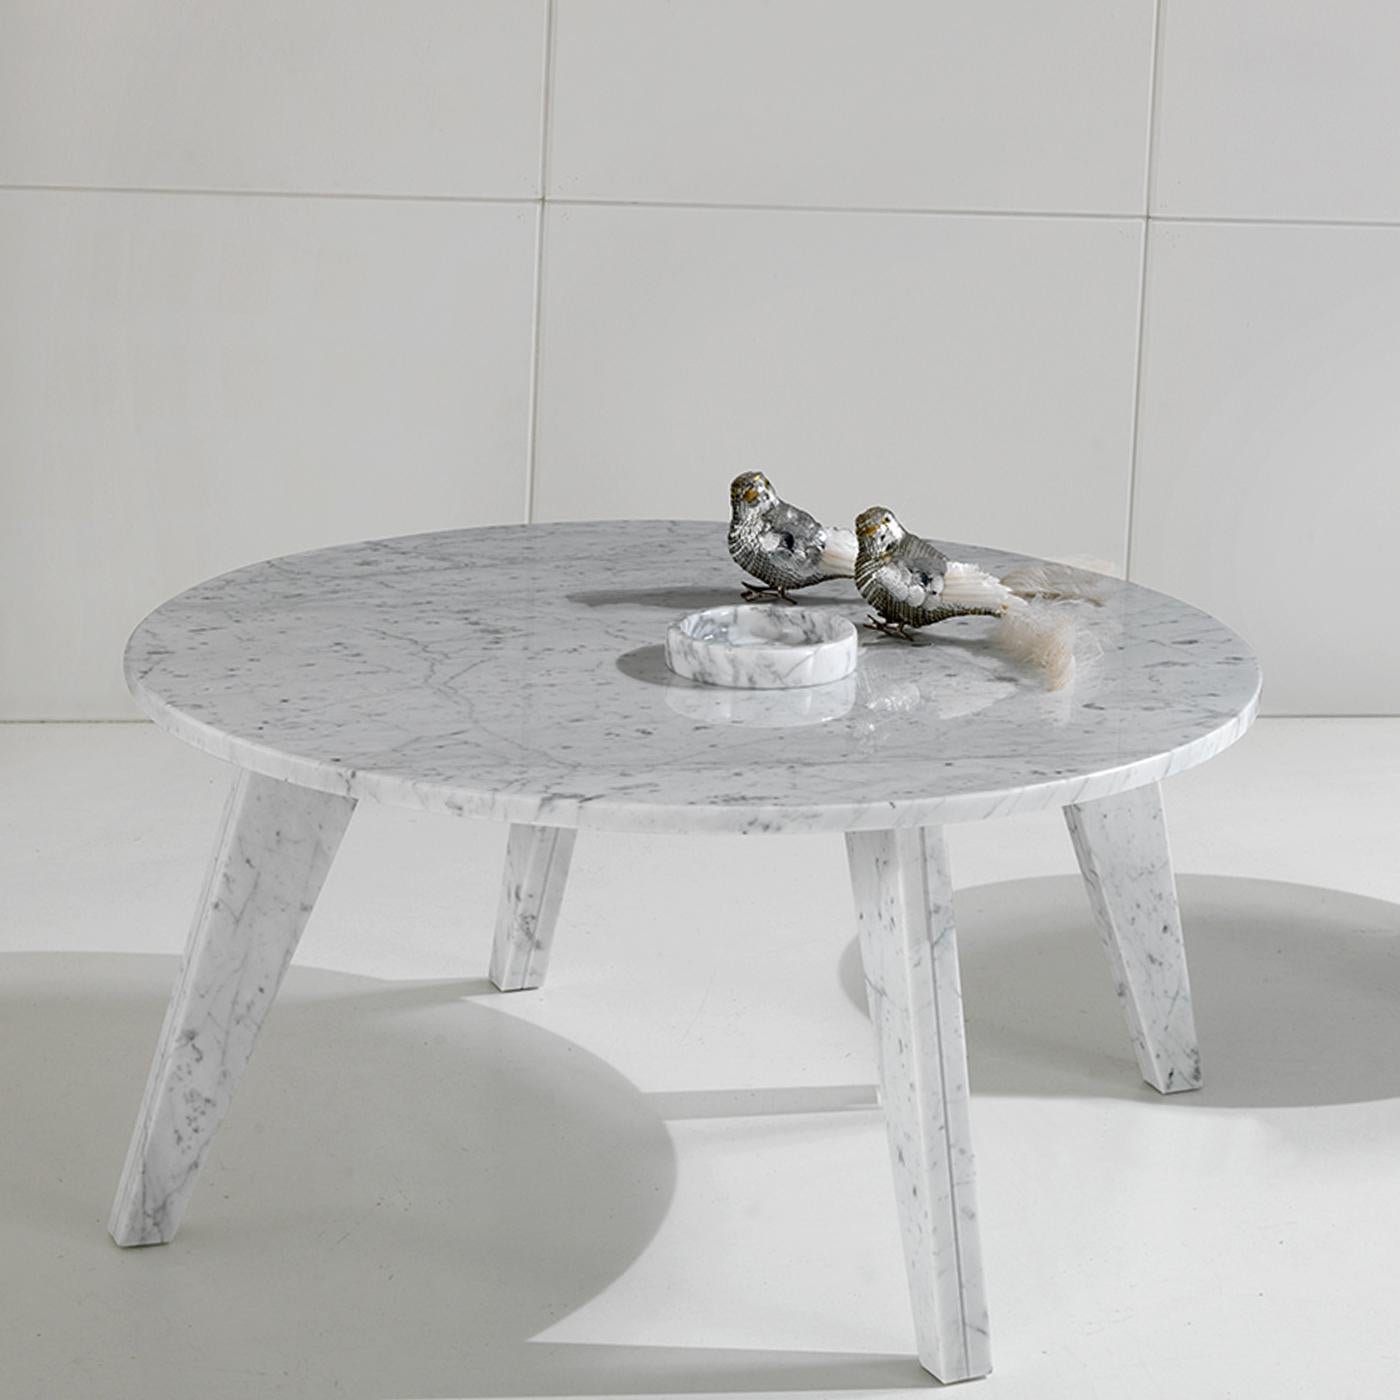 The luxury of white Carrara marble enhances the allure of this stunning coffee table. The gray veins dancing over the white background of the precious stone, quarried in the city of Carrara in Tuscany, make the tapered legs and the round top for an